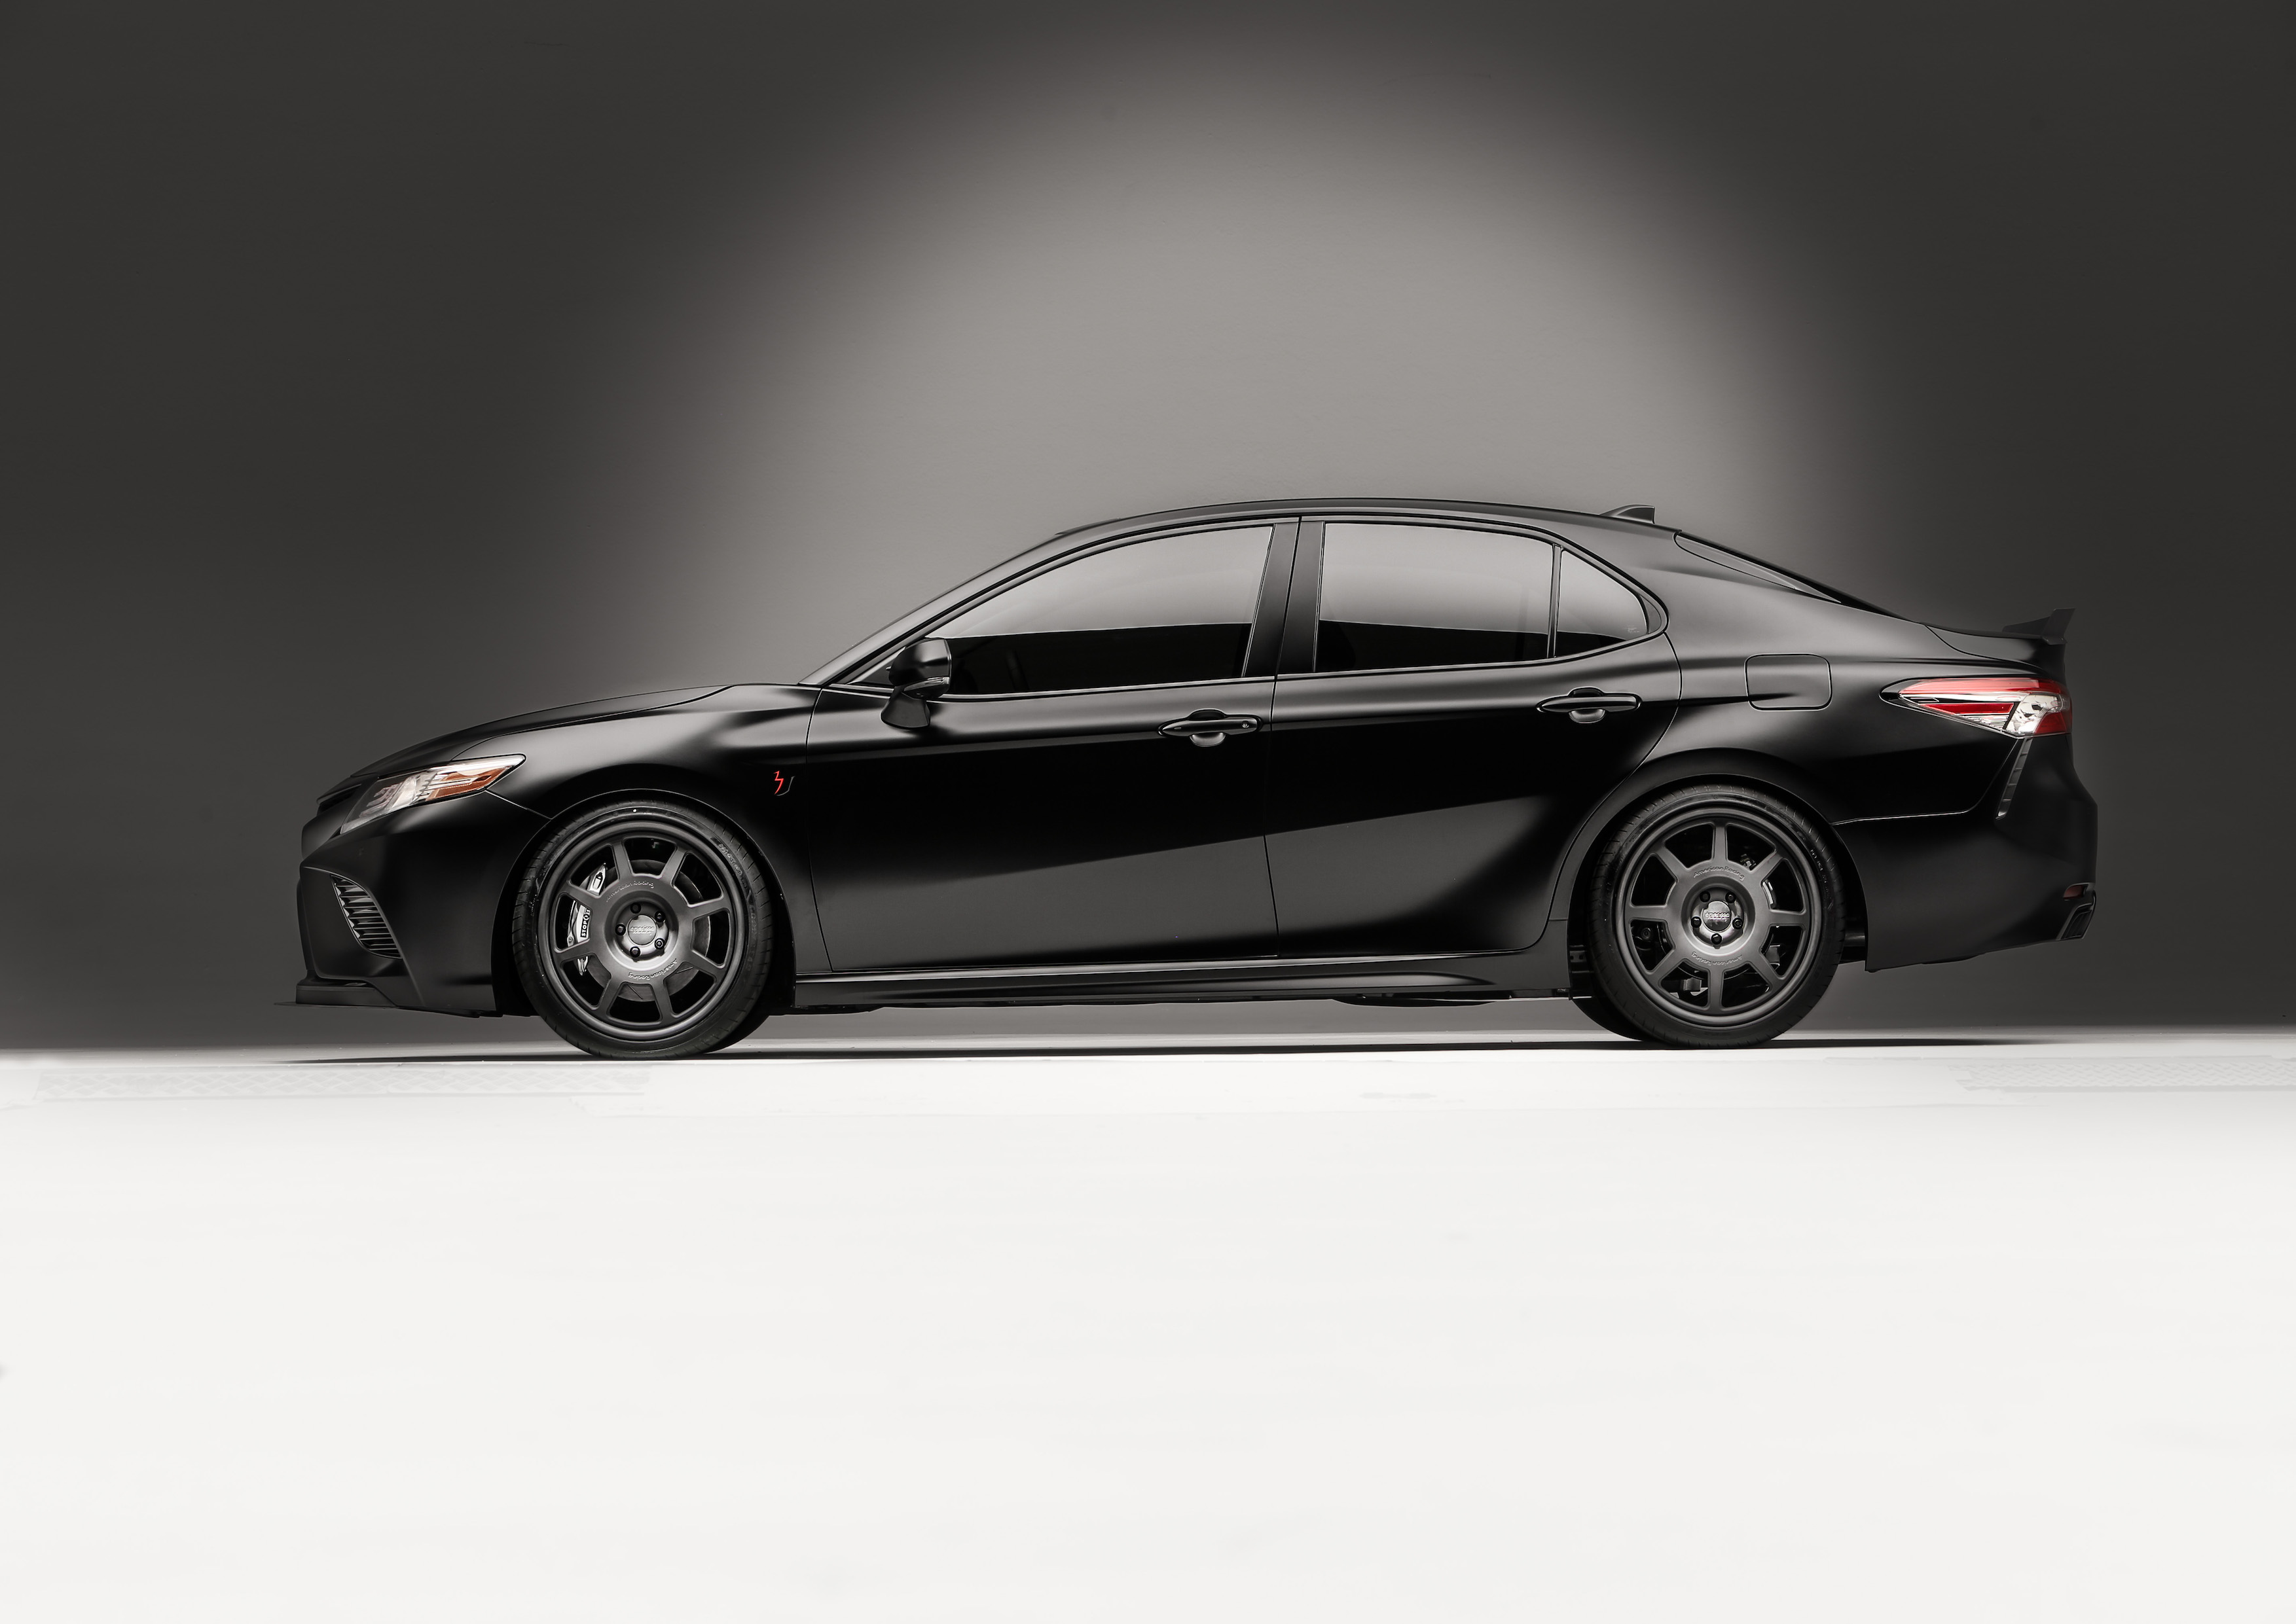 Toyota Races To Sema With 600 Hp C Hr Tuned Camrys Toyota Camry Martin